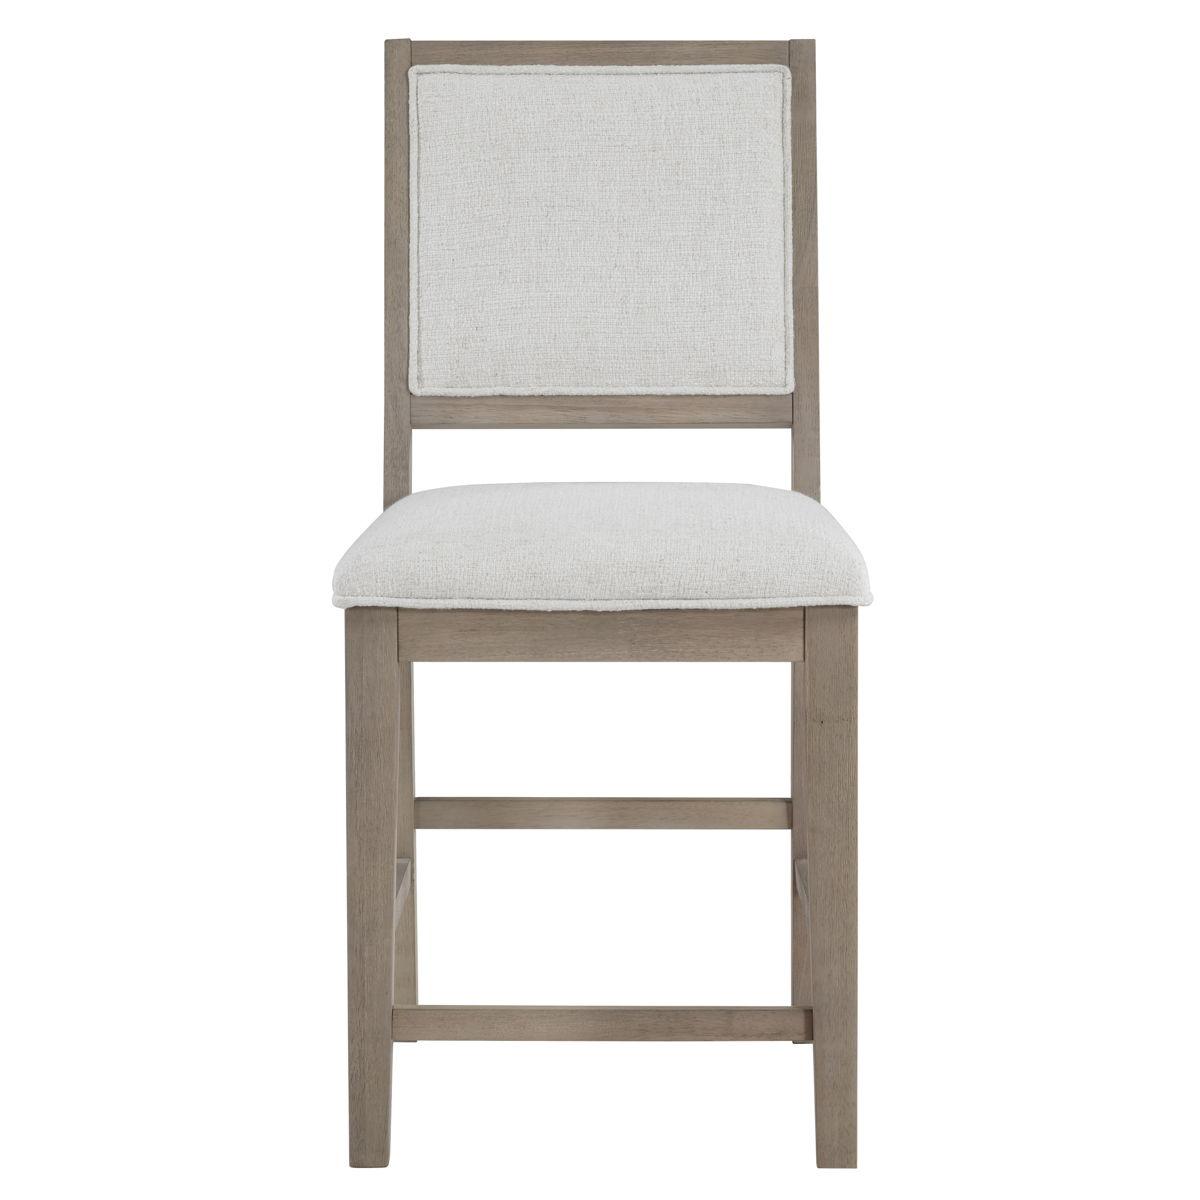 Steve Silver Furniture - Lily - Counter Chair (Set of 2) - Gray - 5th Avenue Furniture